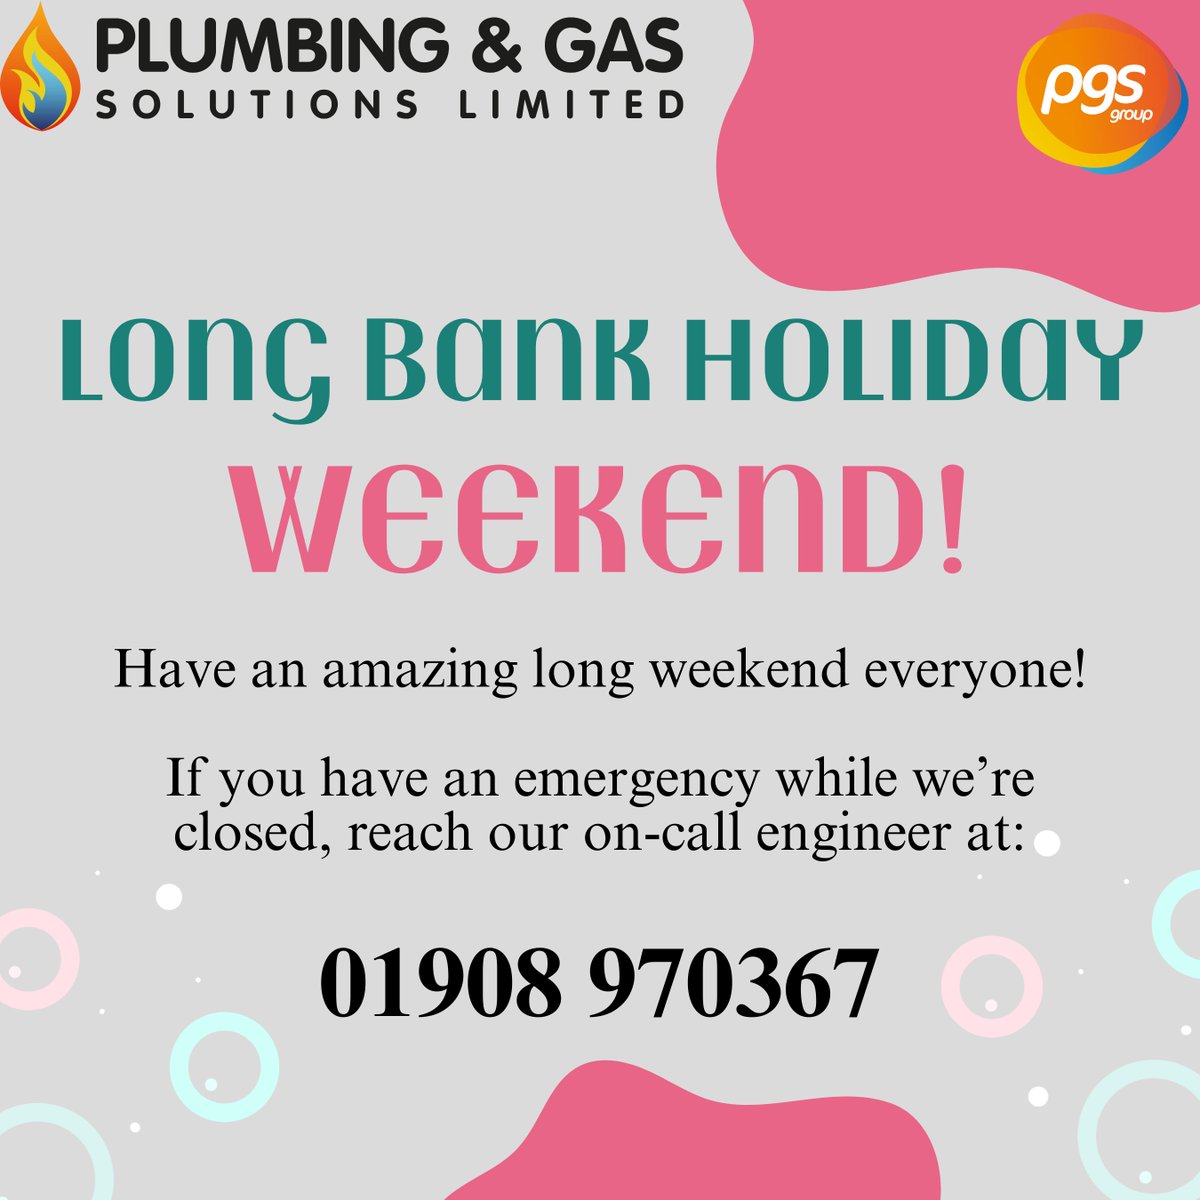 Have a great long weekend, everyone! 😎 Our office will be closed for the long weekend. Don't worry, though. If you have an emergency, we still have an on-call engineer available to deal with urgent issues. For any plumbing or gas-related emergencies, call PGS. 01908 970367 📞